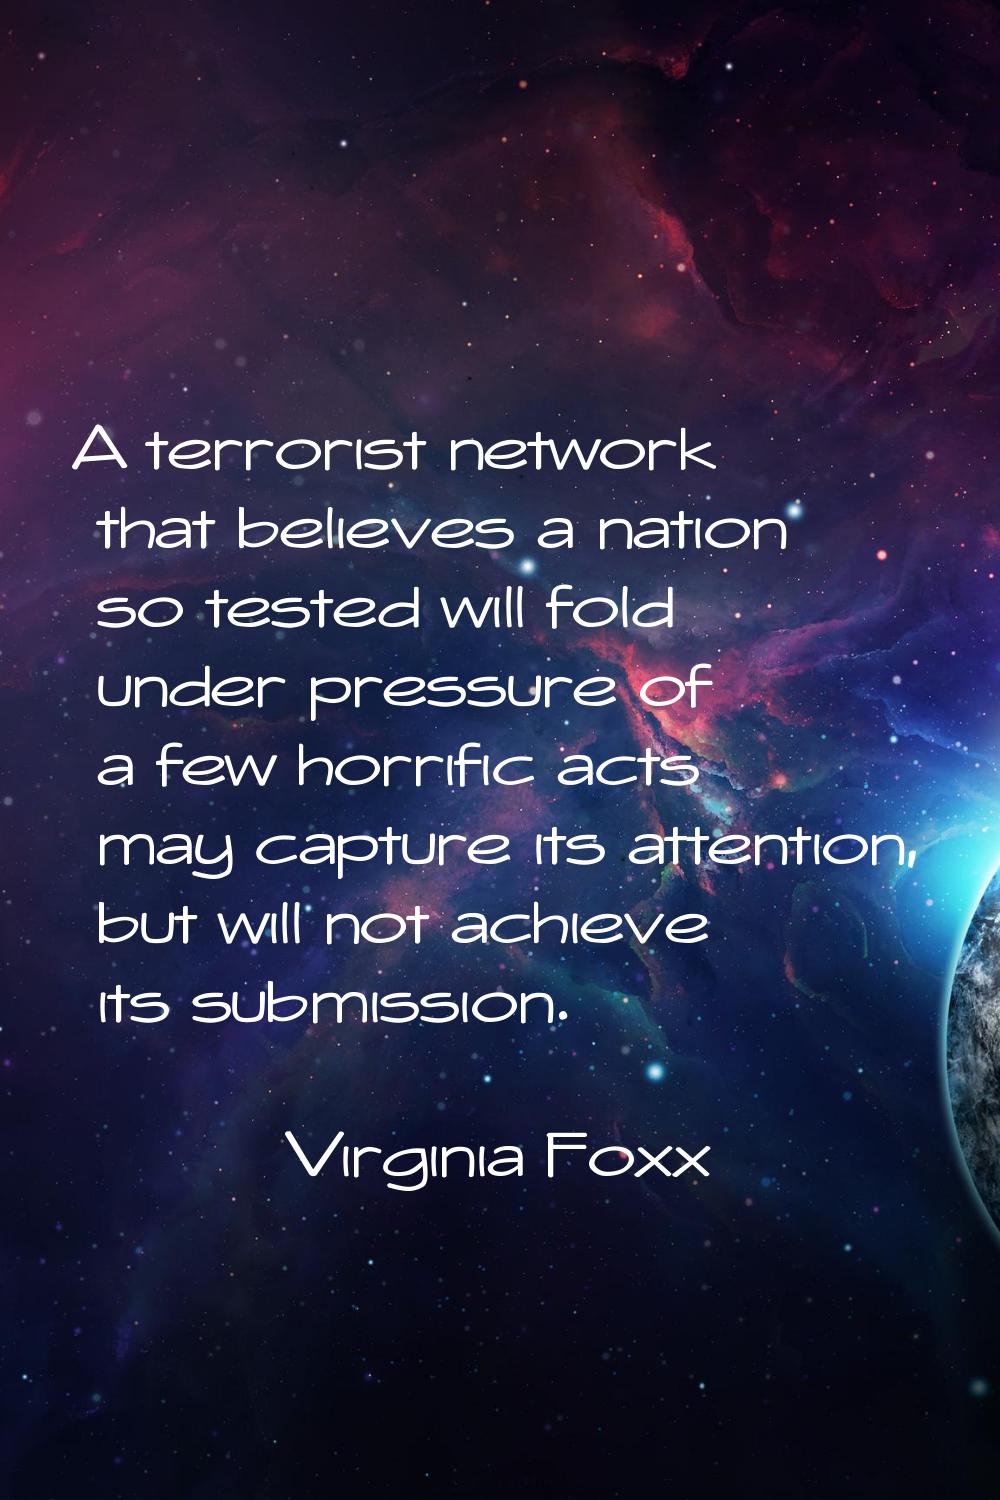 A terrorist network that believes a nation so tested will fold under pressure of a few horrific act